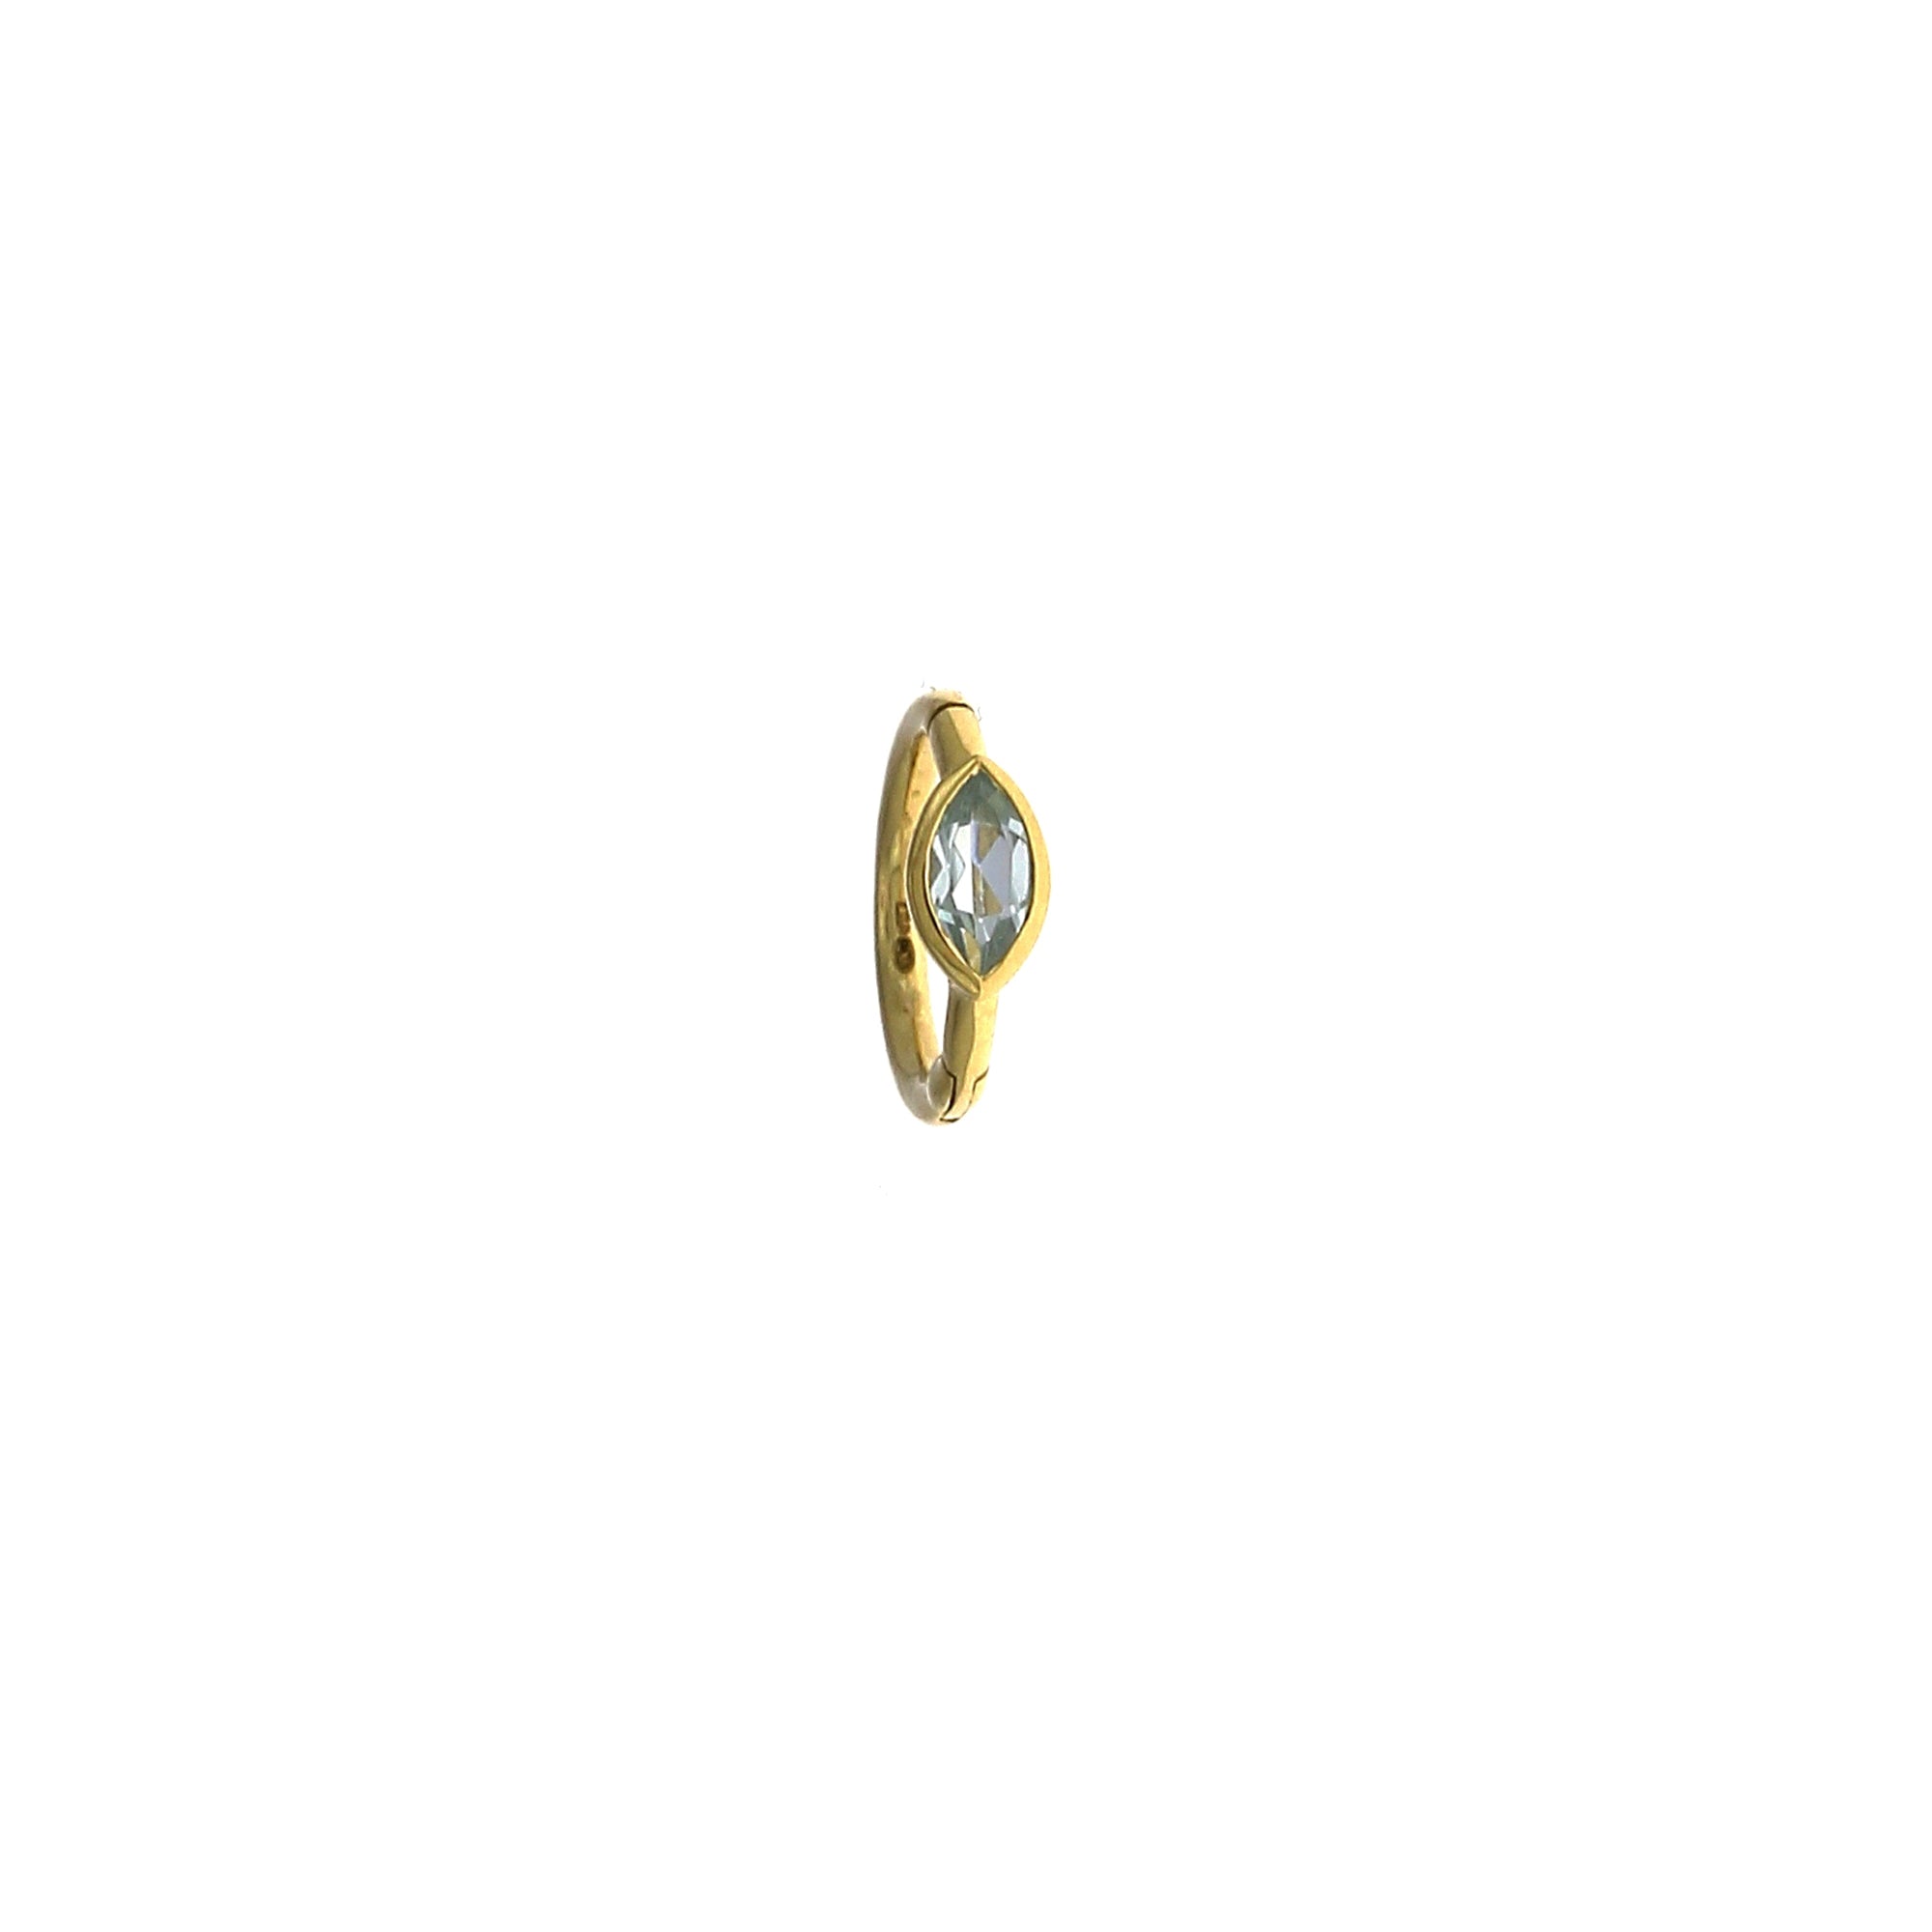 6.5mm Marquise Blue Topaz 3x2mm Yellow Gold Hoop